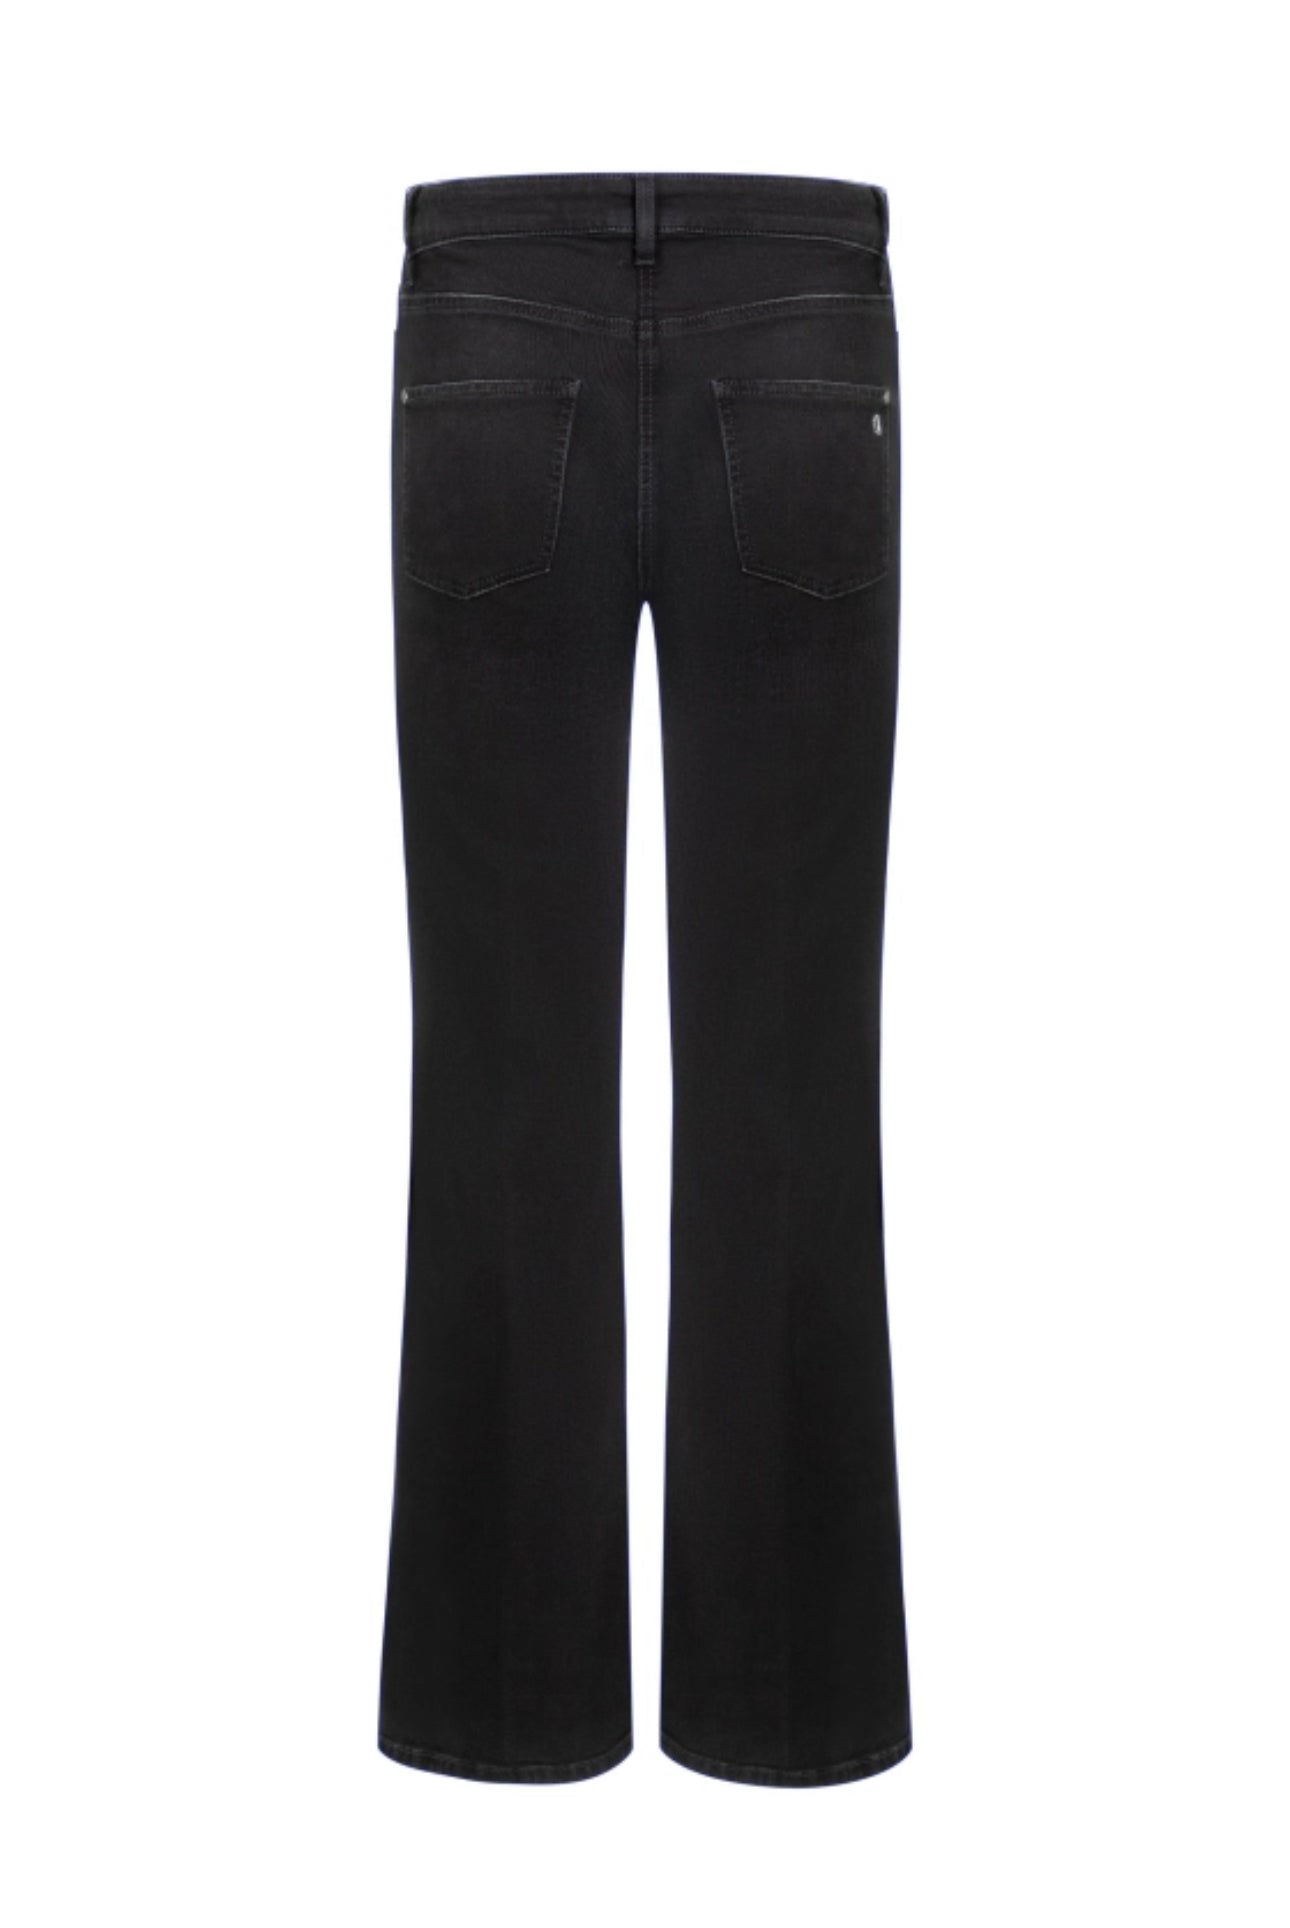 Black Sparkle Bootcut Jeans (26) at  Women's Jeans store